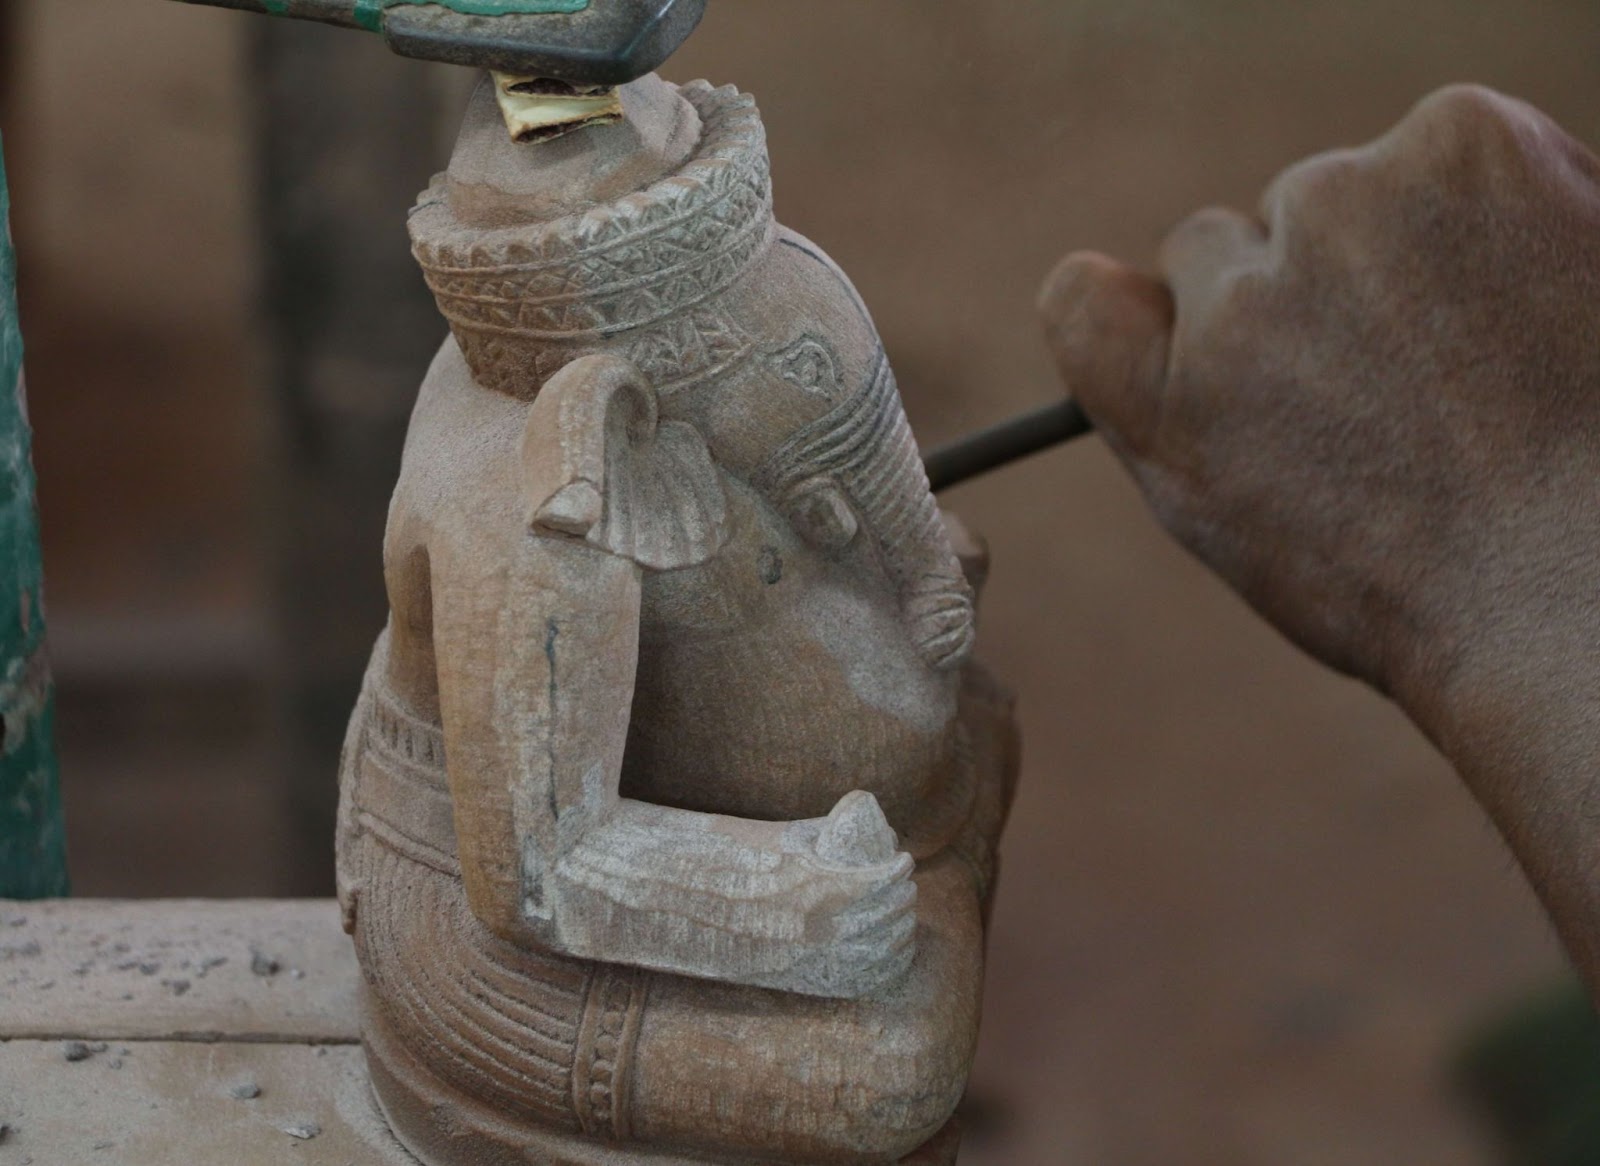 This is a close-up of a intricate carvings of Lord Ganesh at Artisan Angkor.